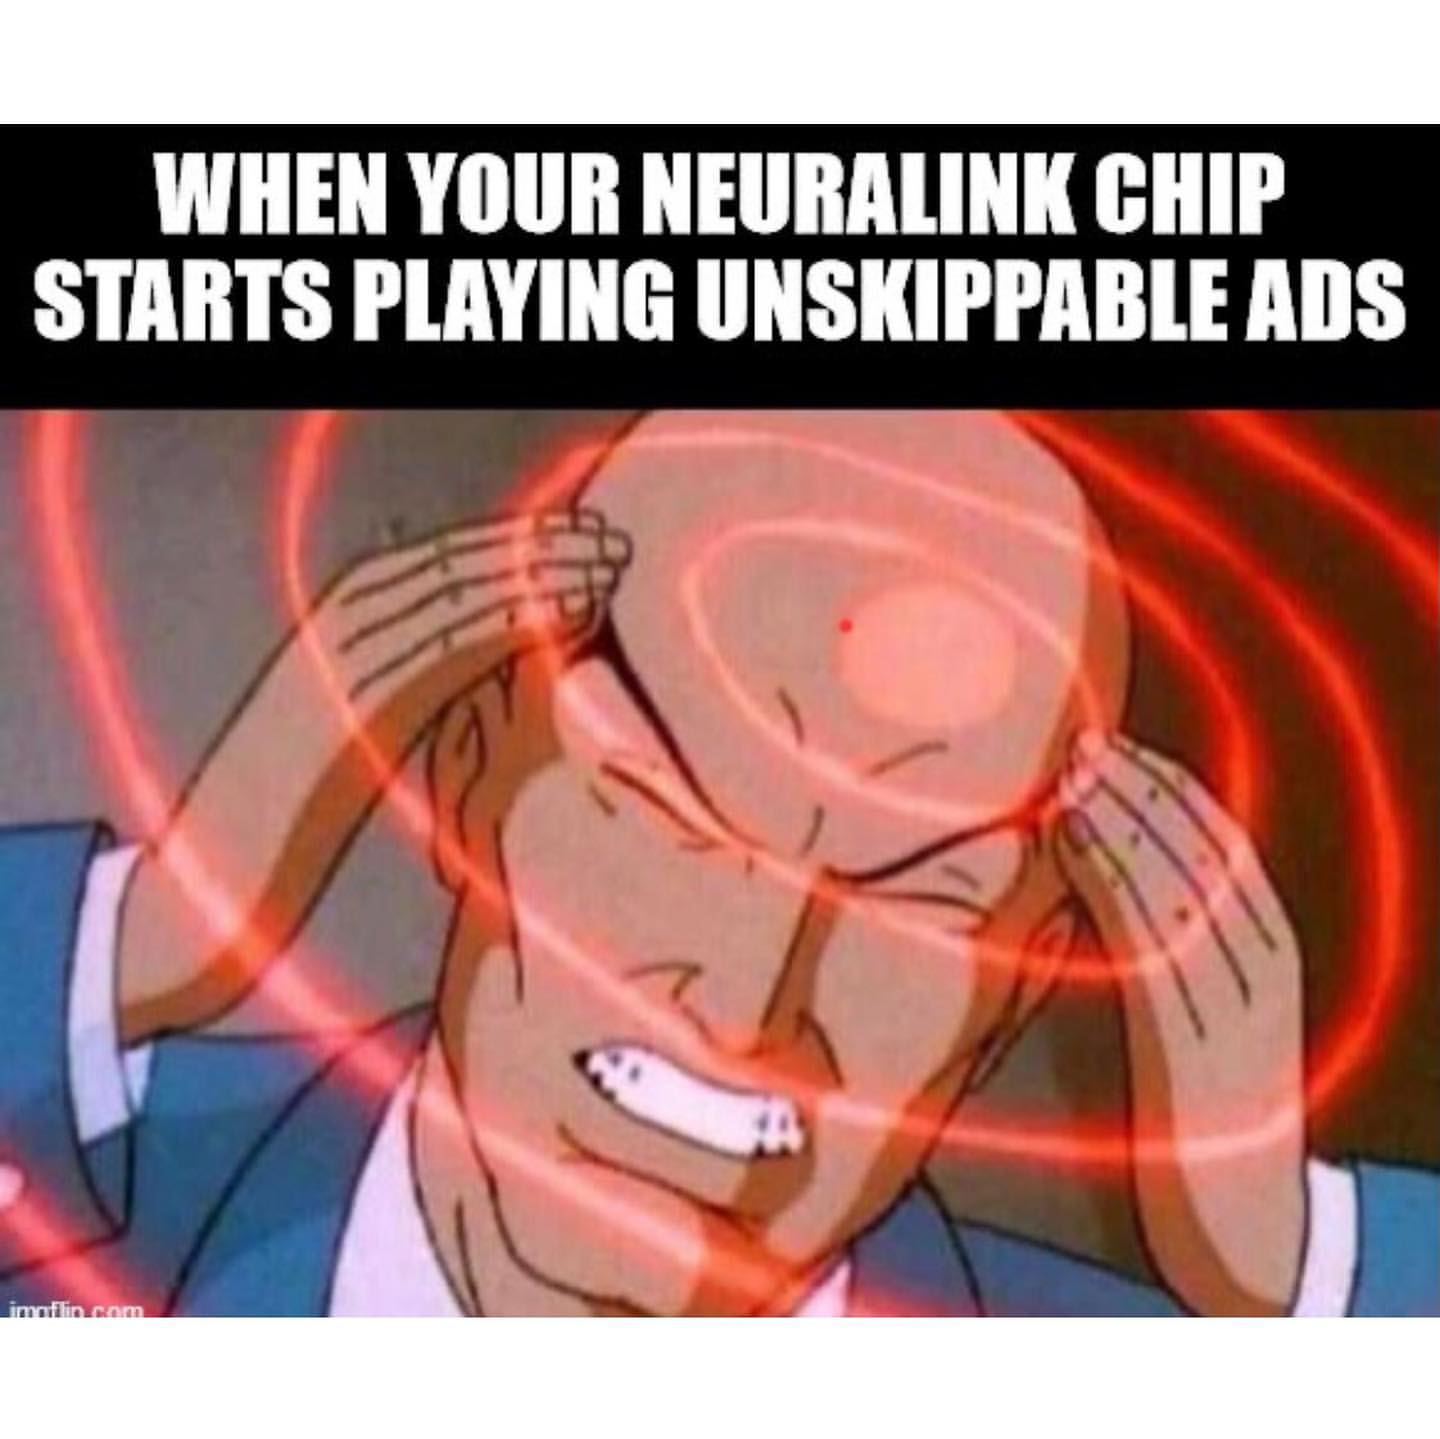 When your neuralink chip starts playing unskippable ads.